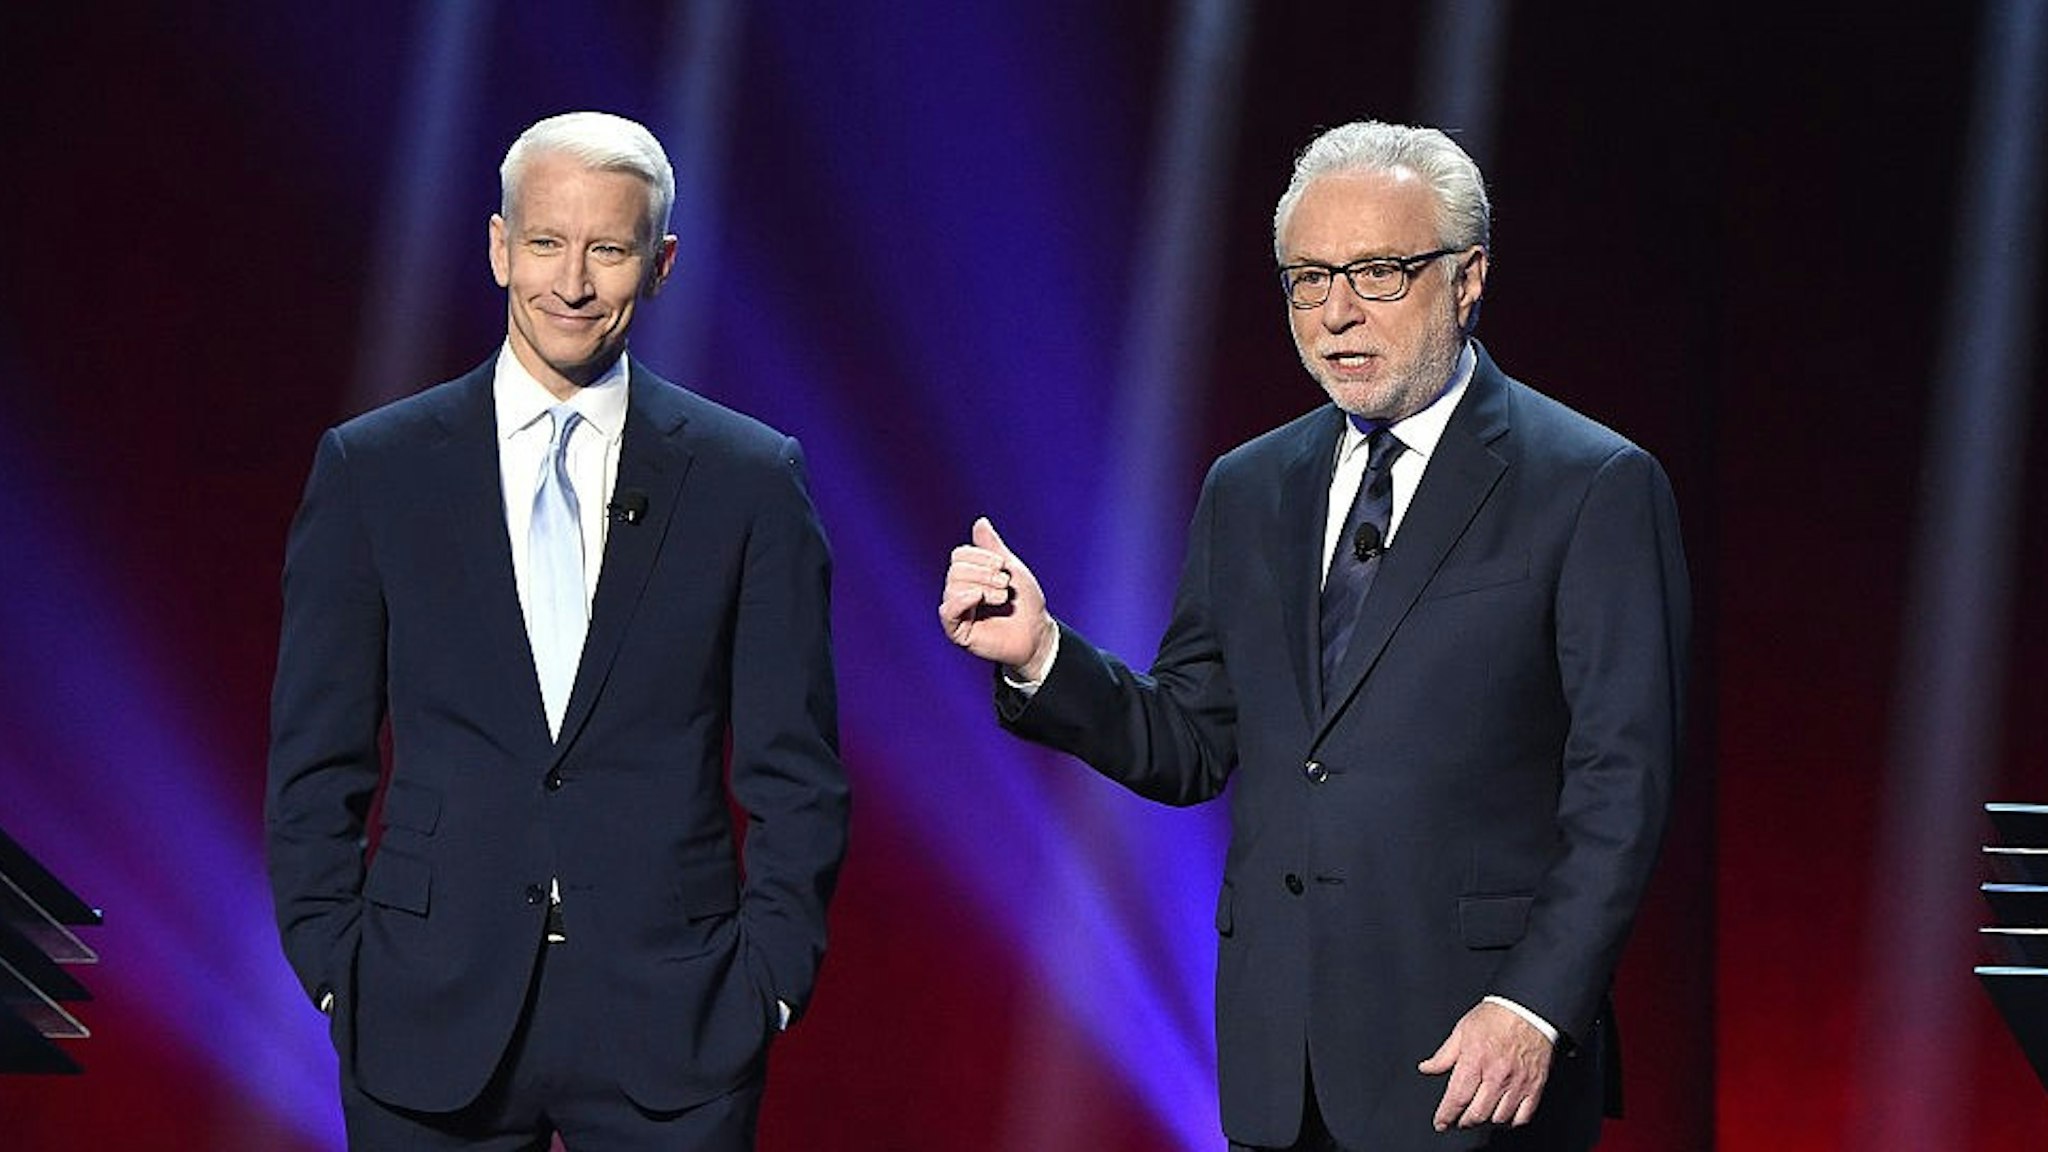 Anderson Cooper and Wolf Blitzer appear on stage during Turner Upfront 2016 show at The Theater at Madison Square Garden on May 18, 2016 in New York City.